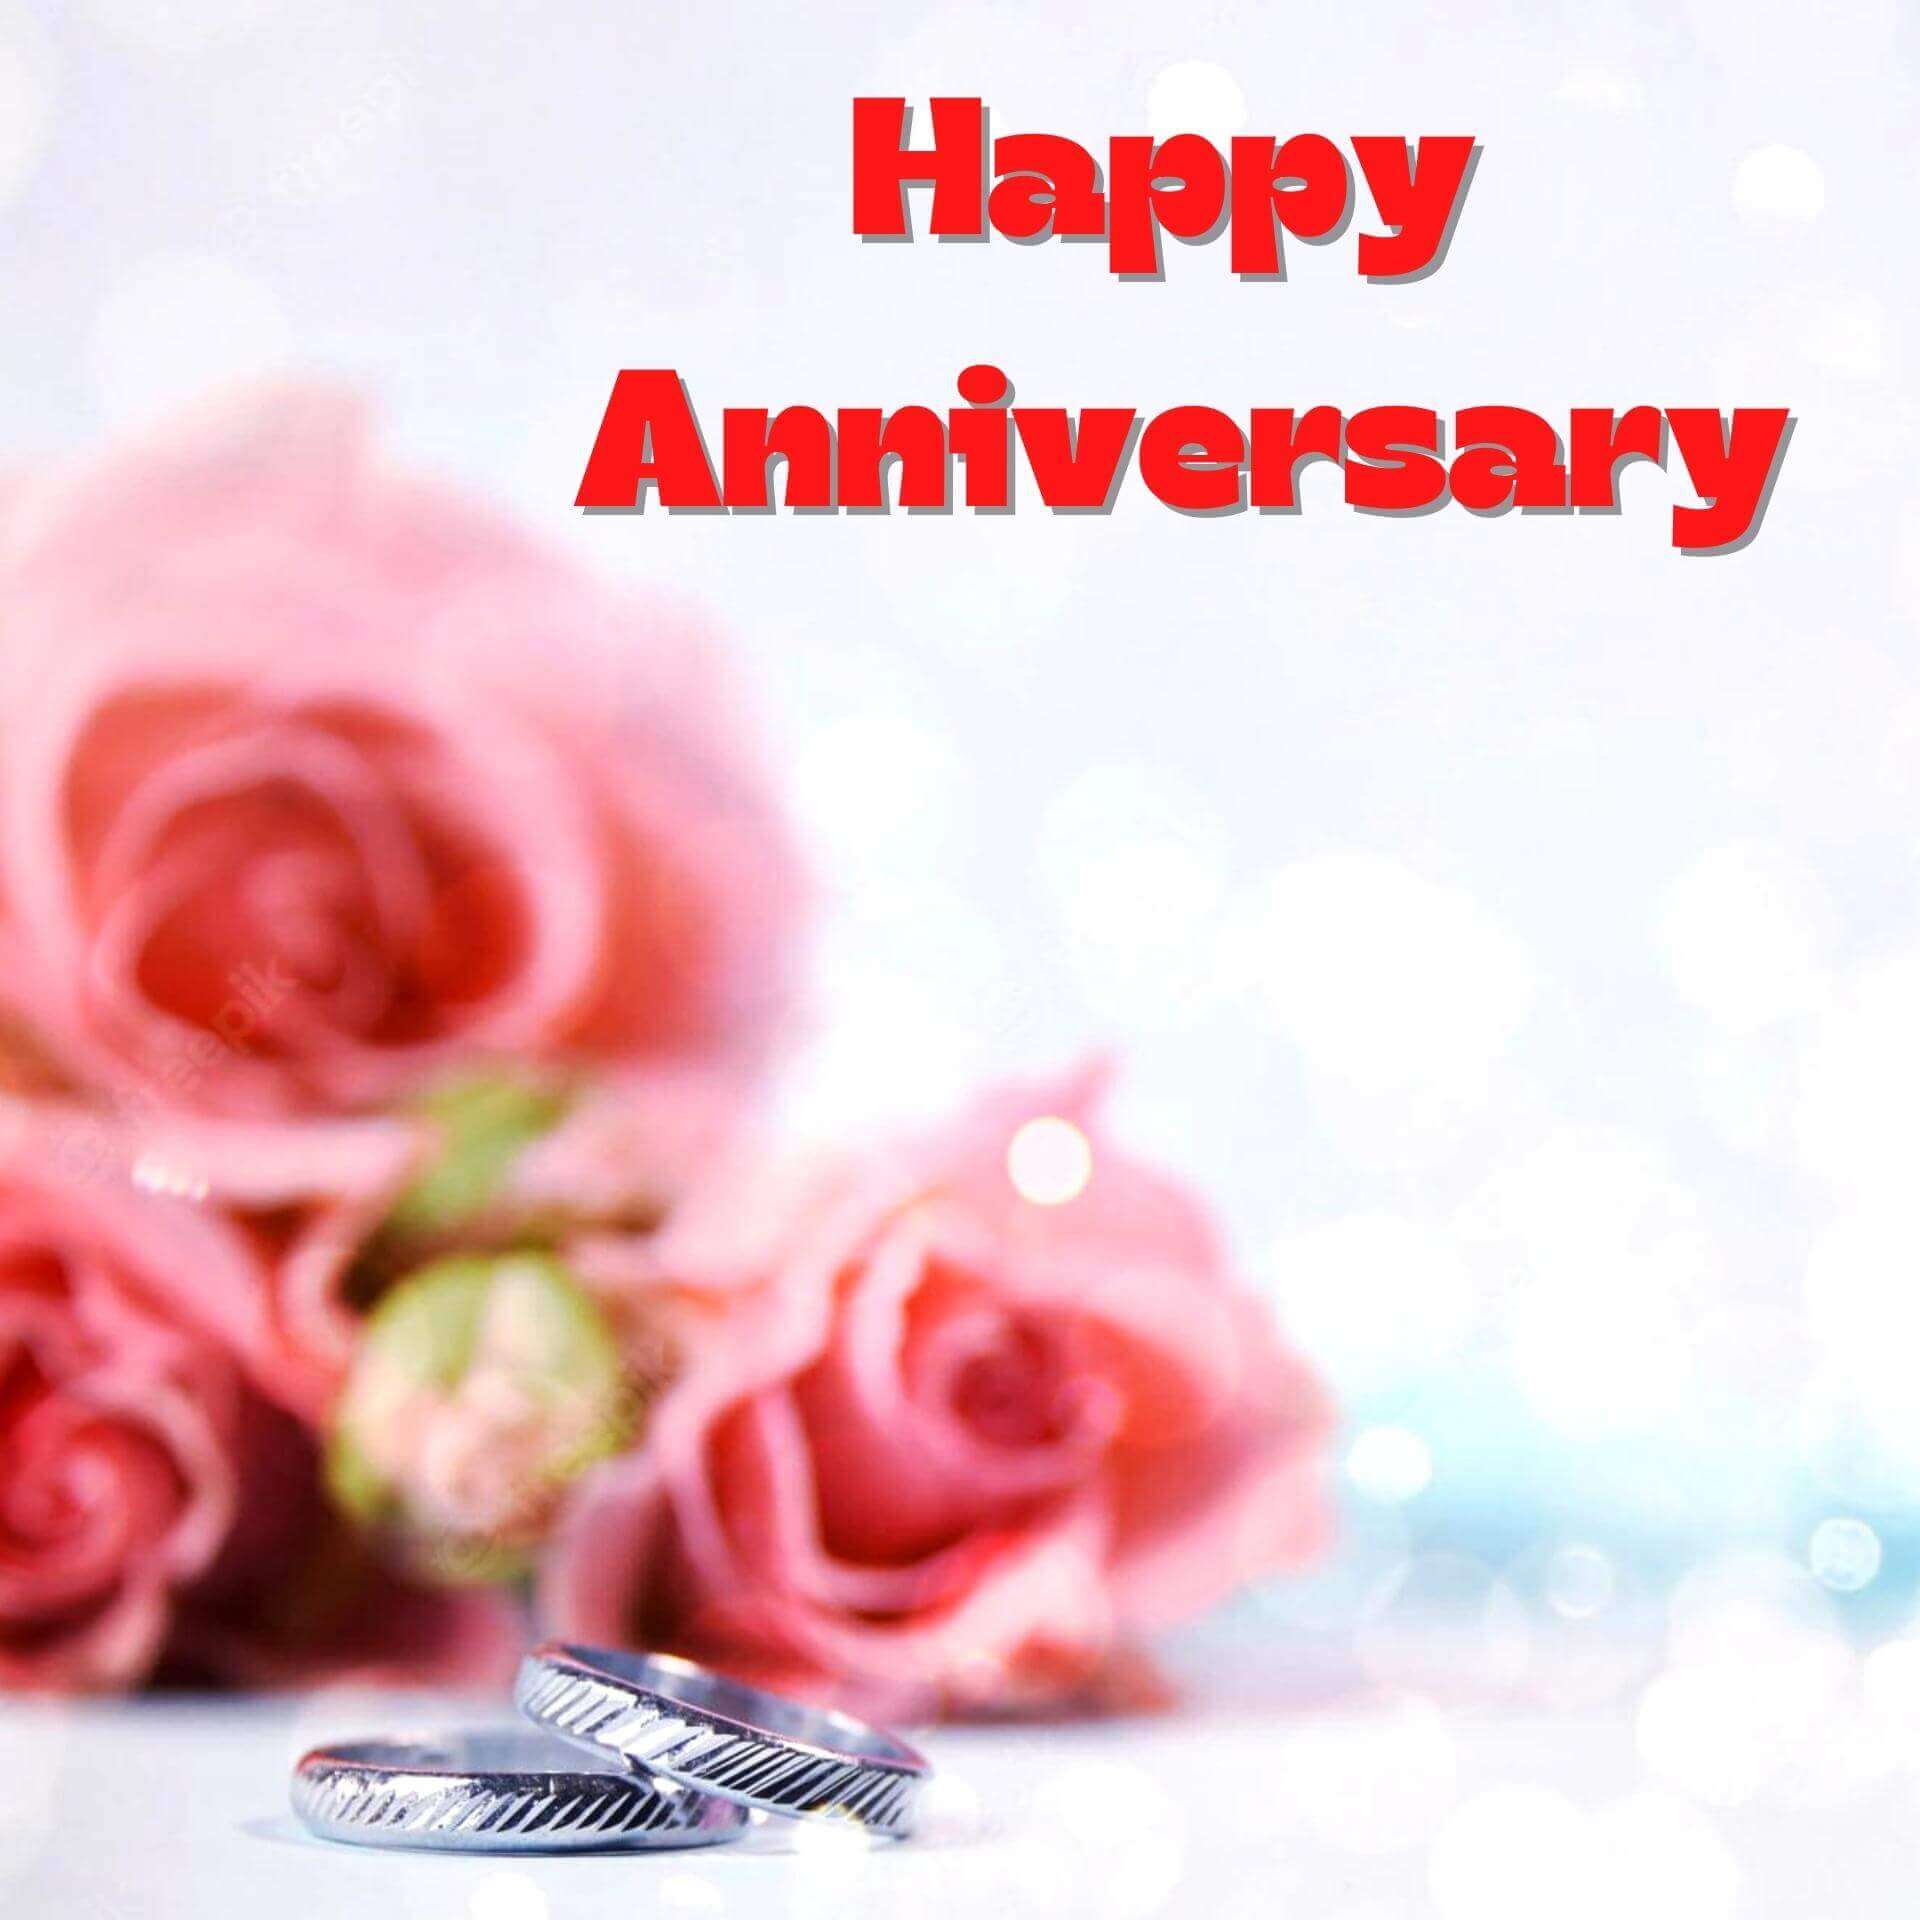 Red Rose happy anniversary images Wallpaper For Wife